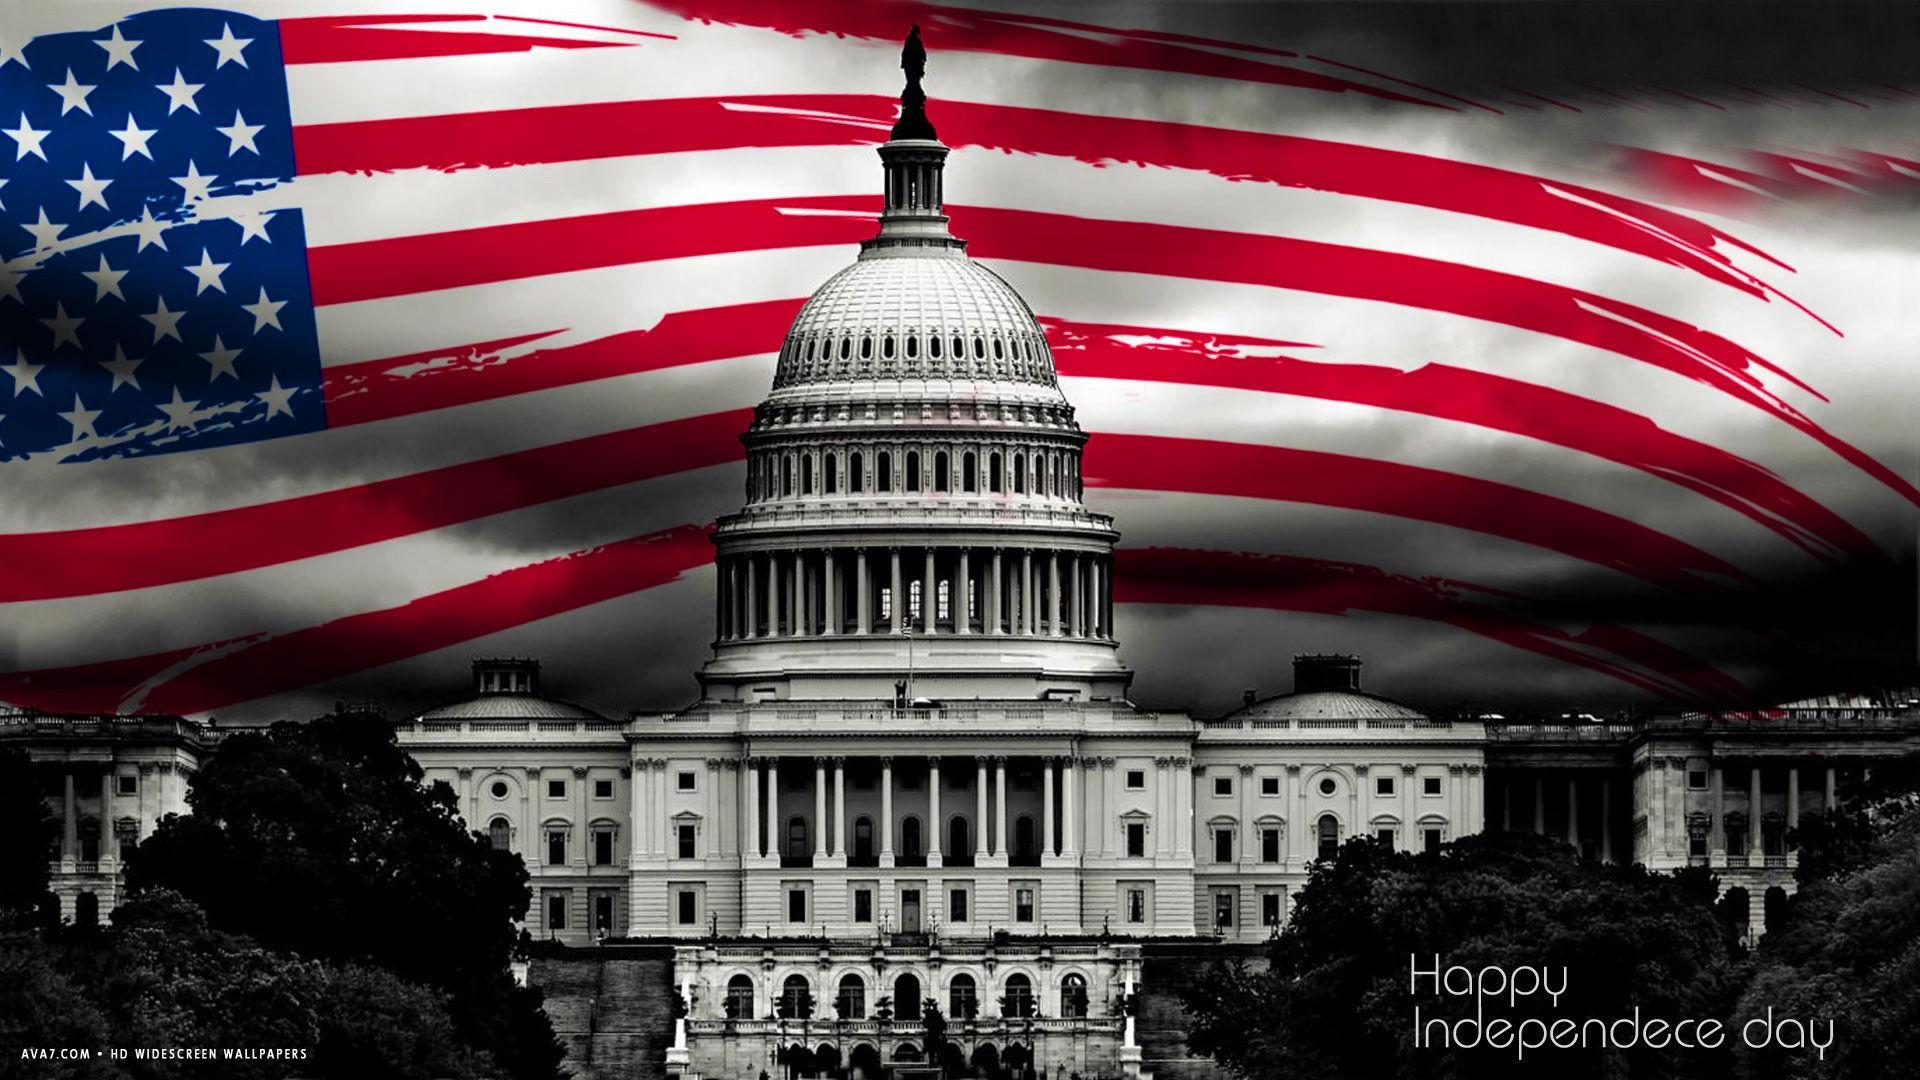 happy independence day 4th july holiday us flag white house holiday HD widescreen wallpaper / holidays background